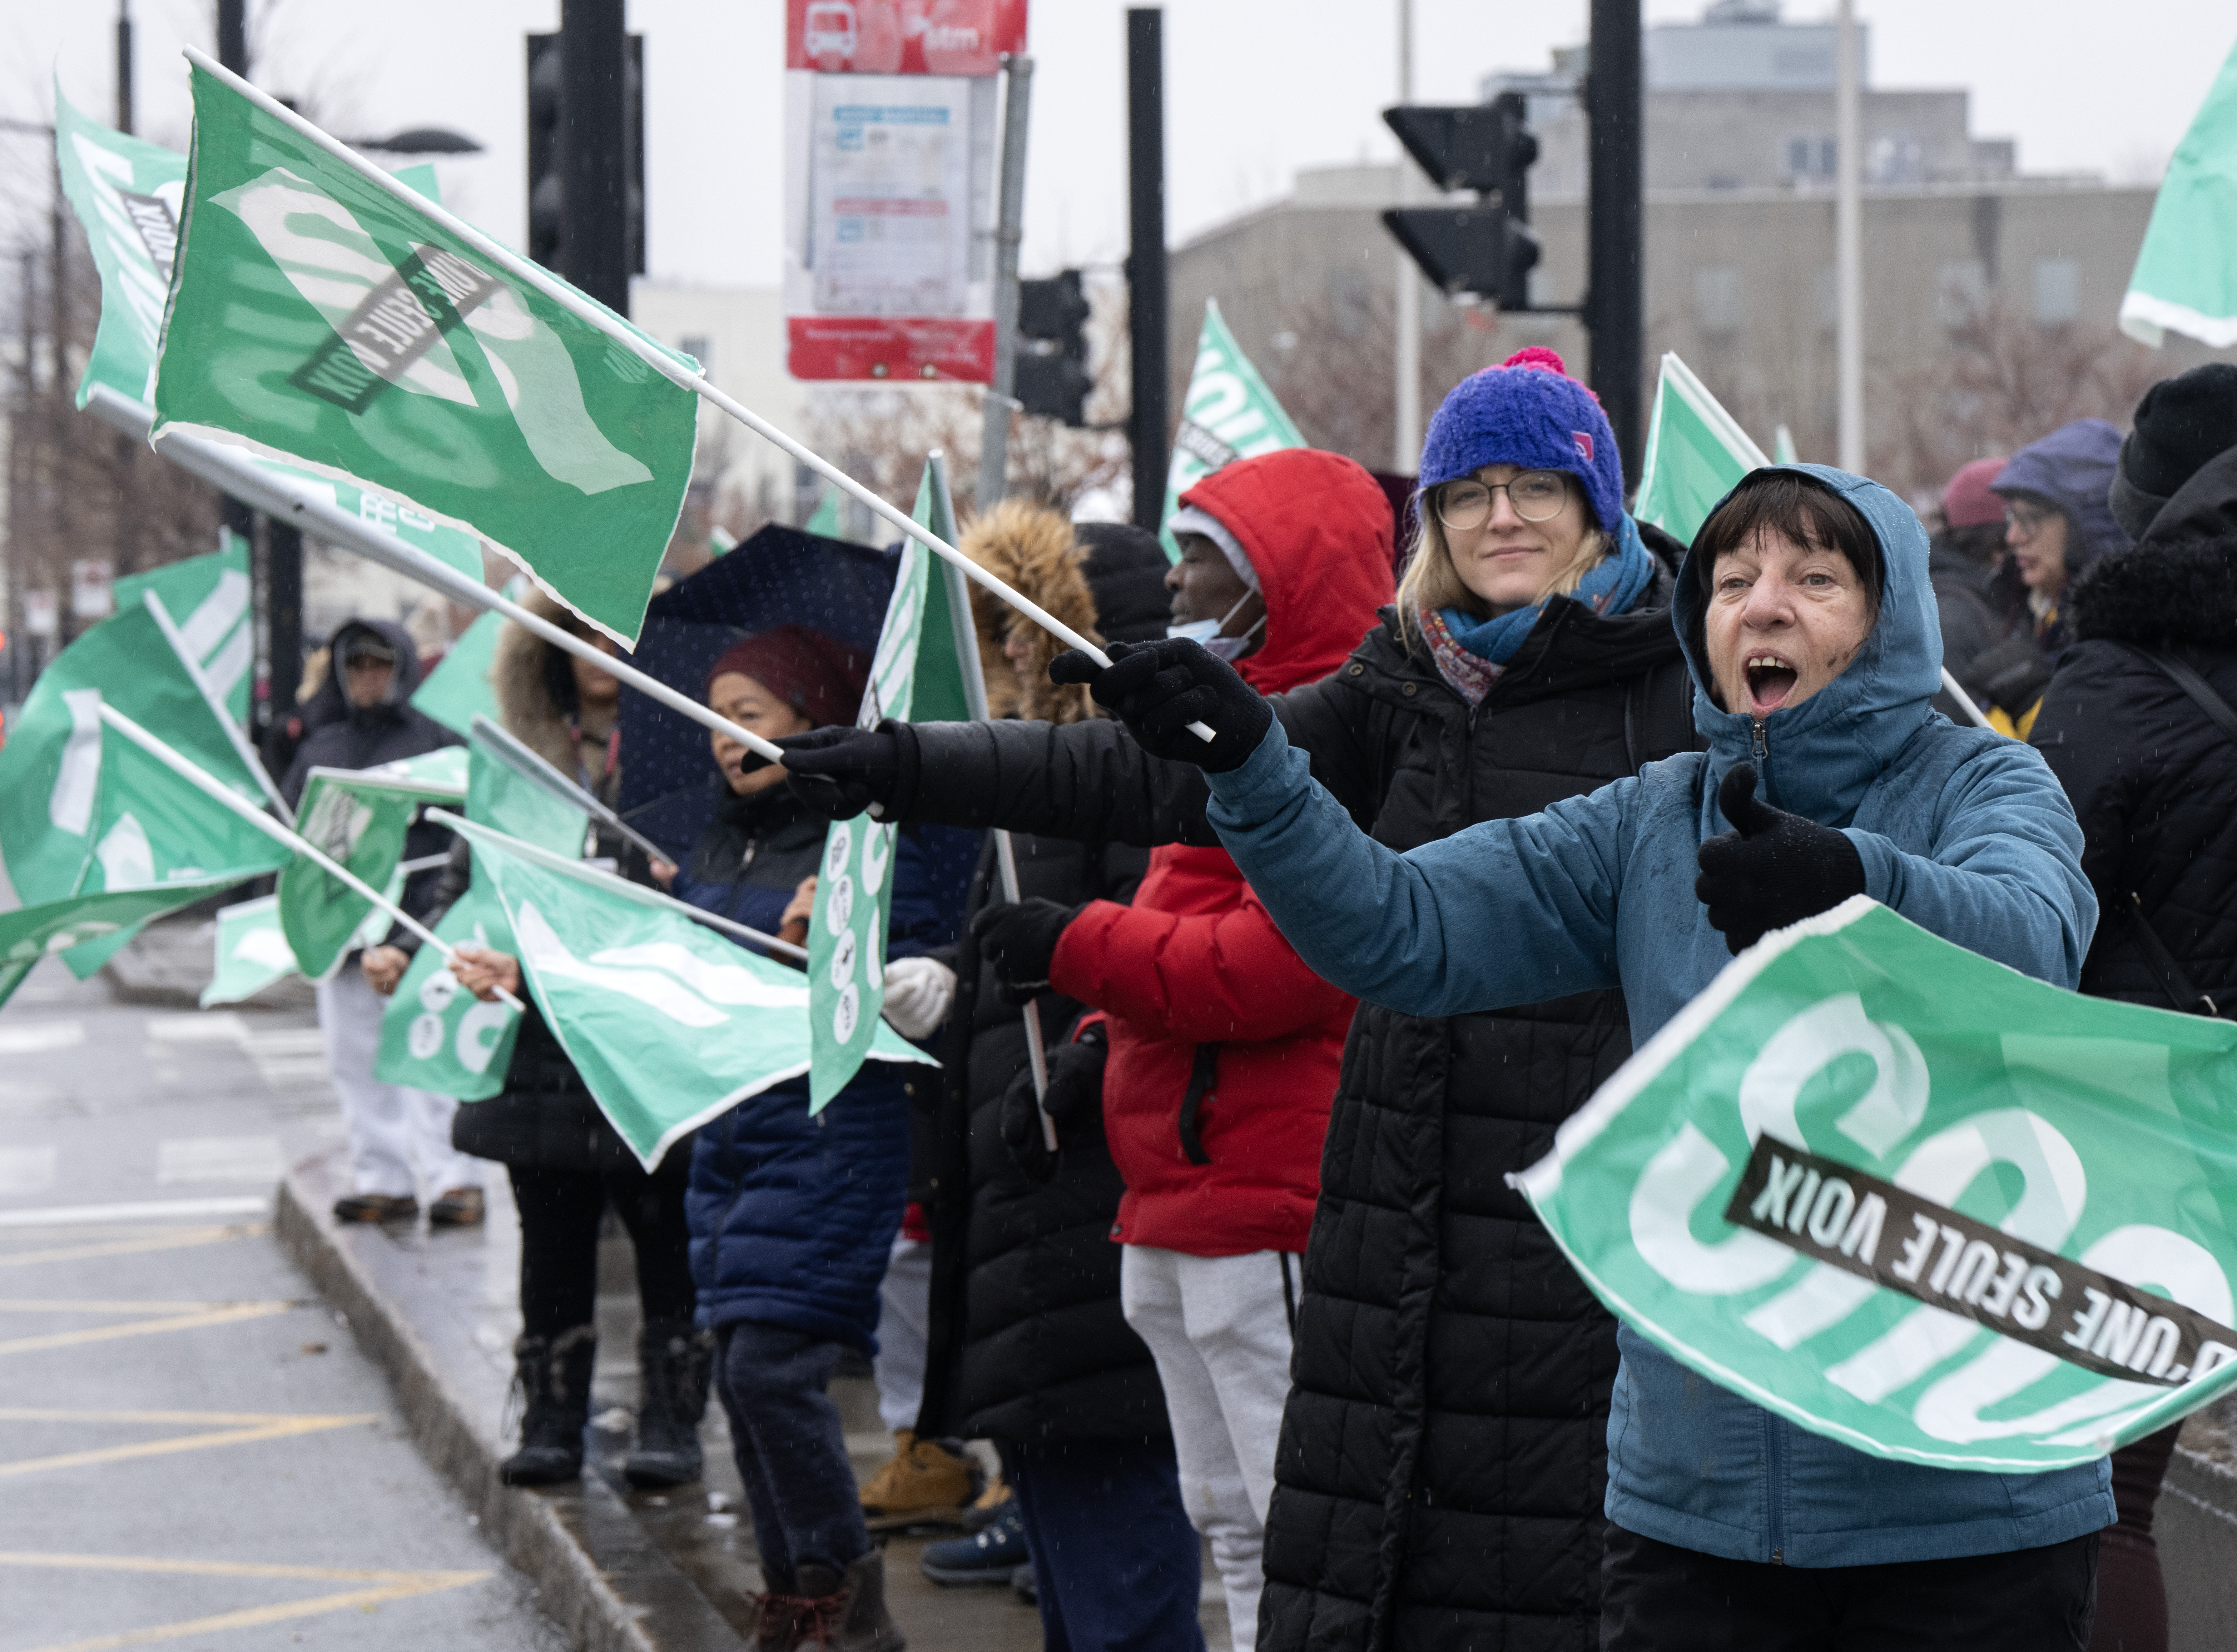 By the numbers: The never-ending strikes in Quebec and the impact it’s having